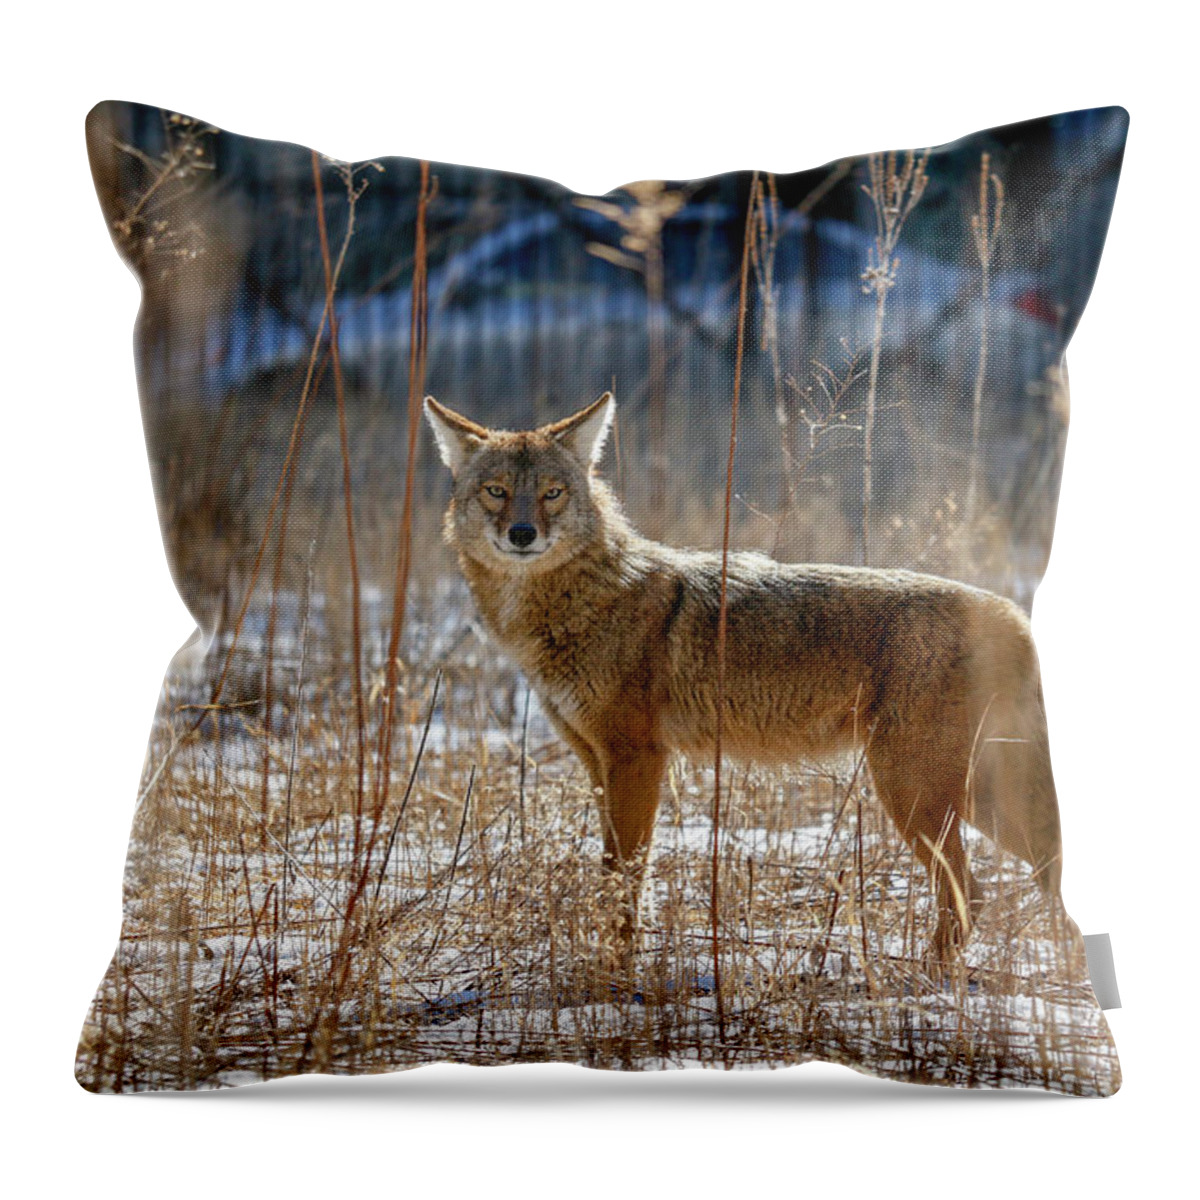 Coyote Throw Pillow featuring the photograph The Streeterville Coyote by Todd Bannor